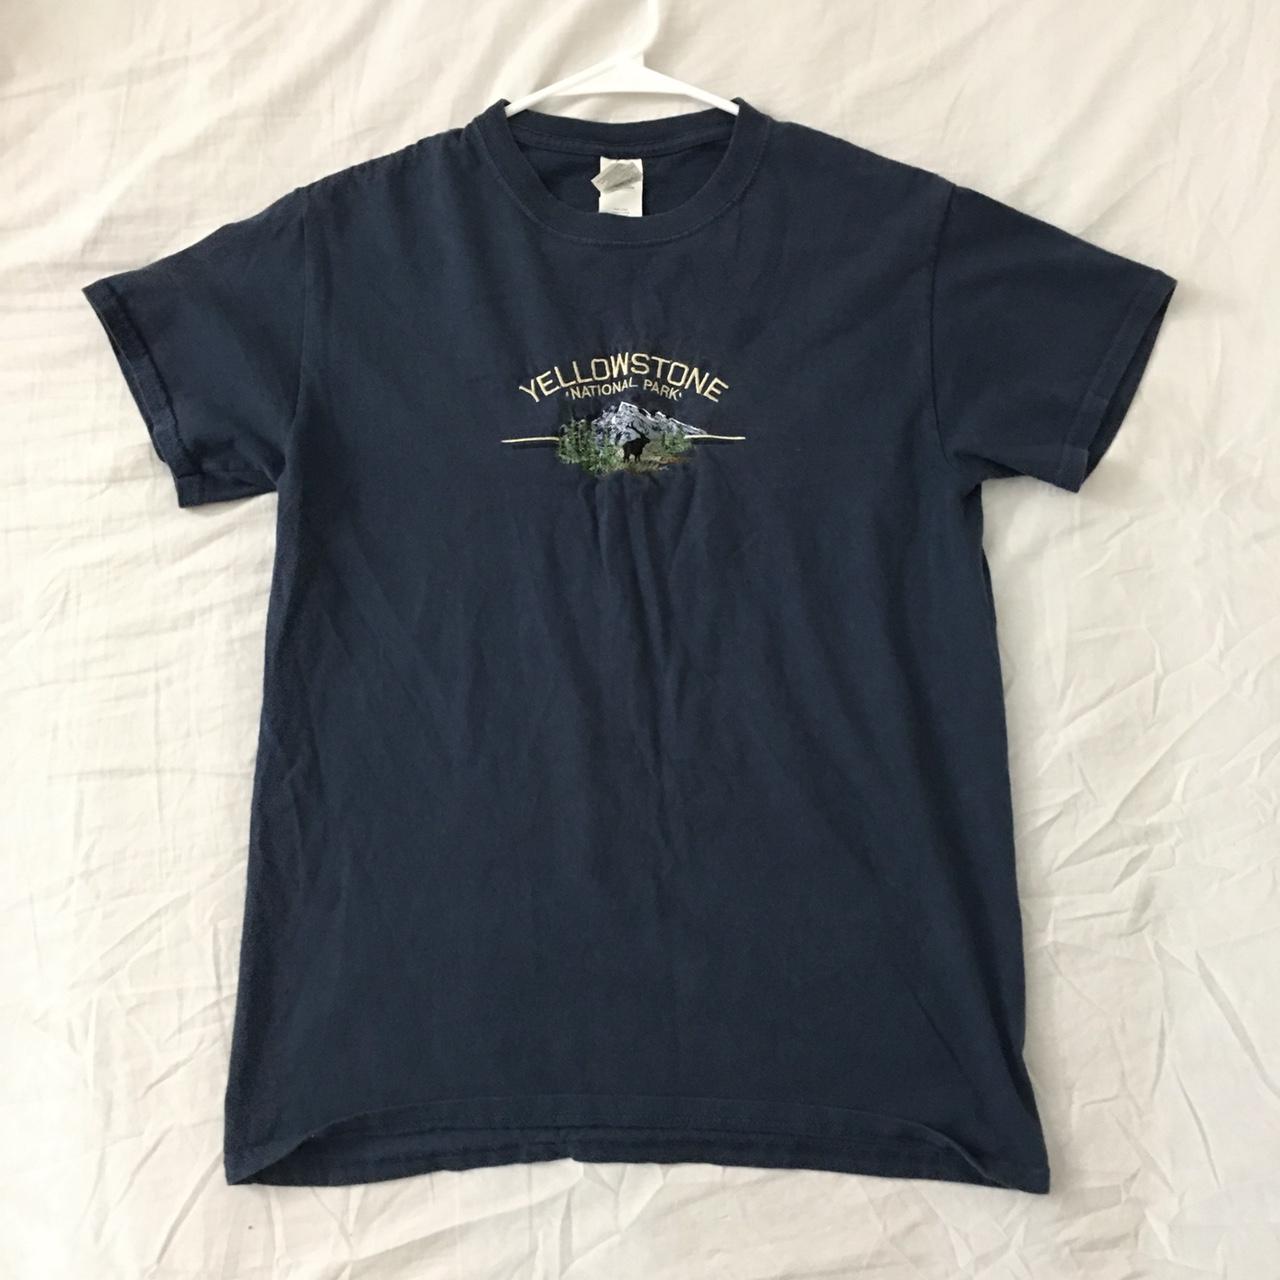 Super cute and authentic Yellowstone Park t-shirt /... - Depop